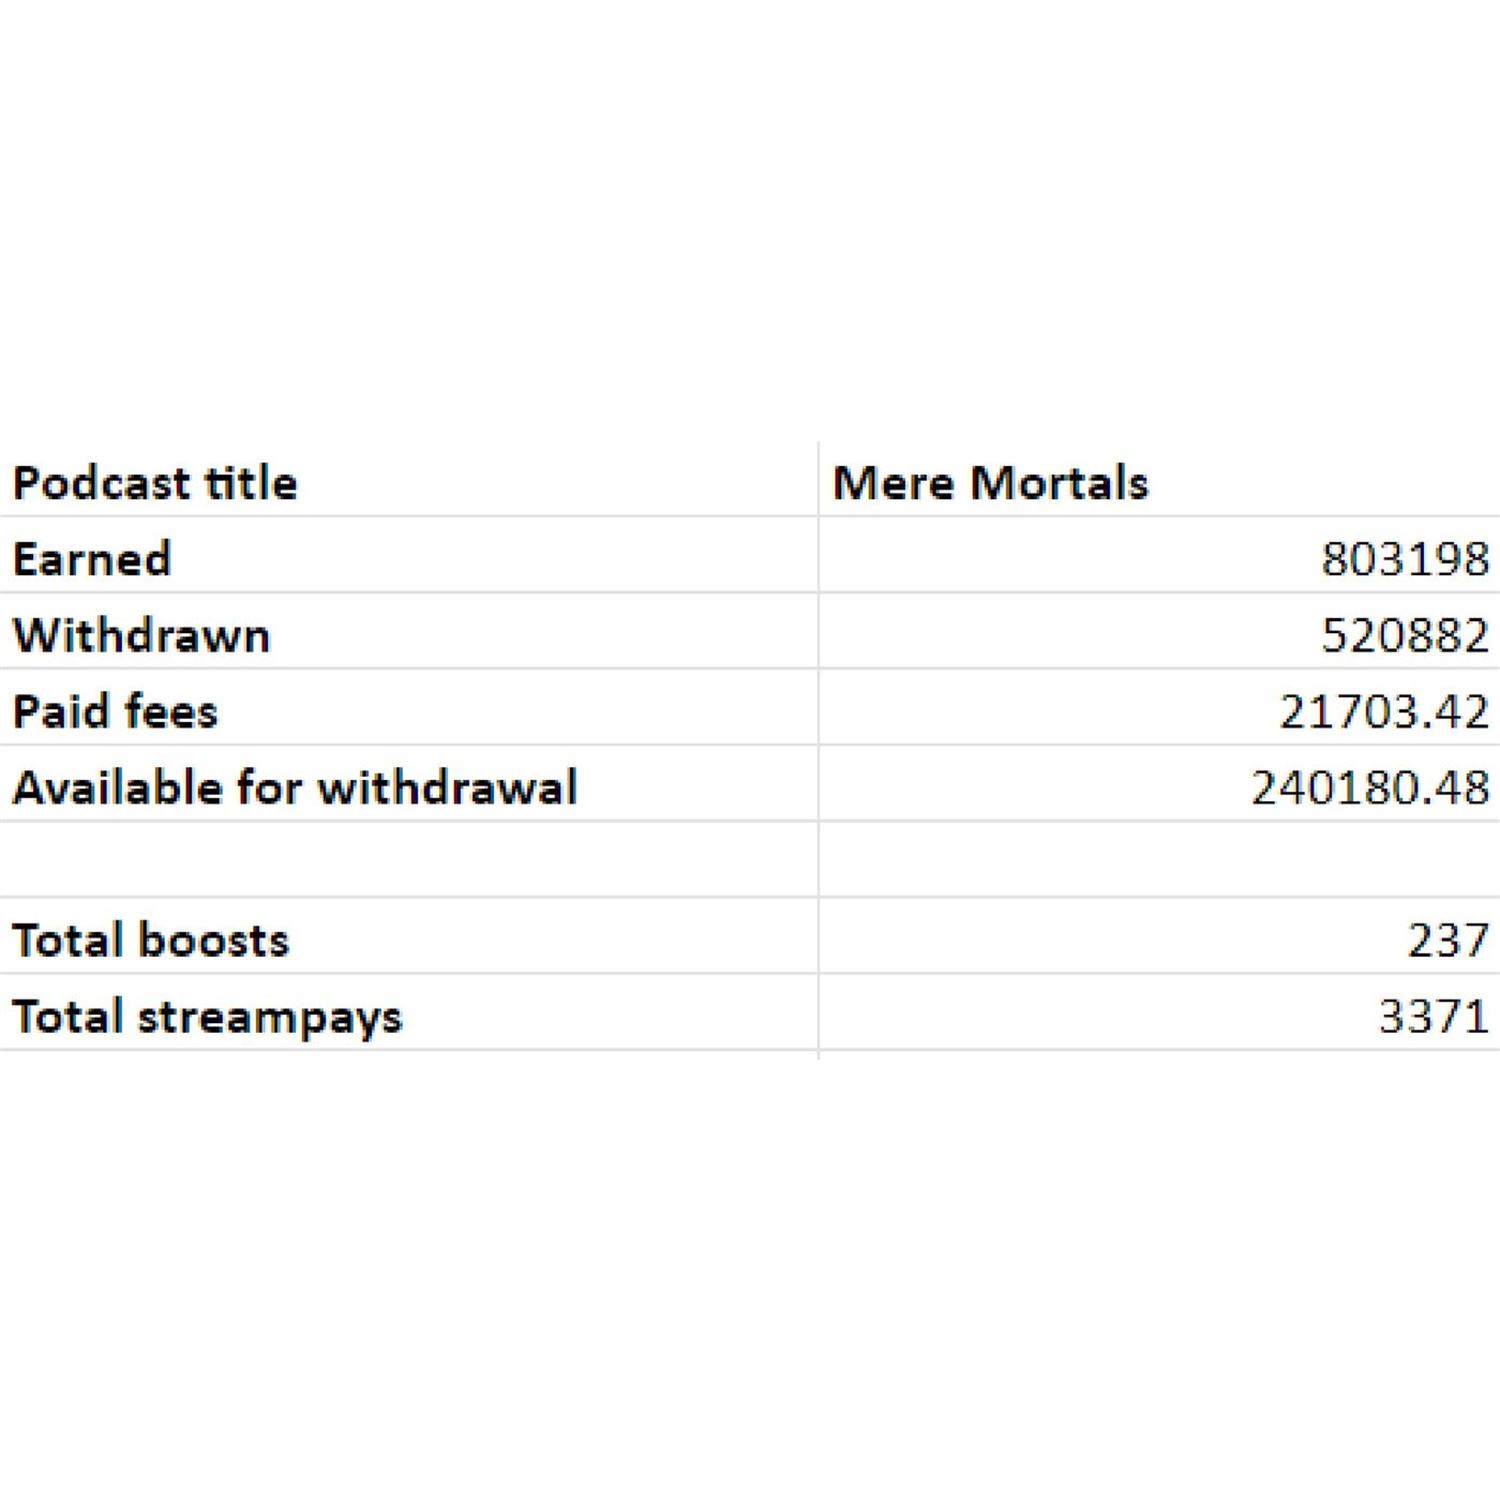 How much have we made in 2.5 years of podcasting